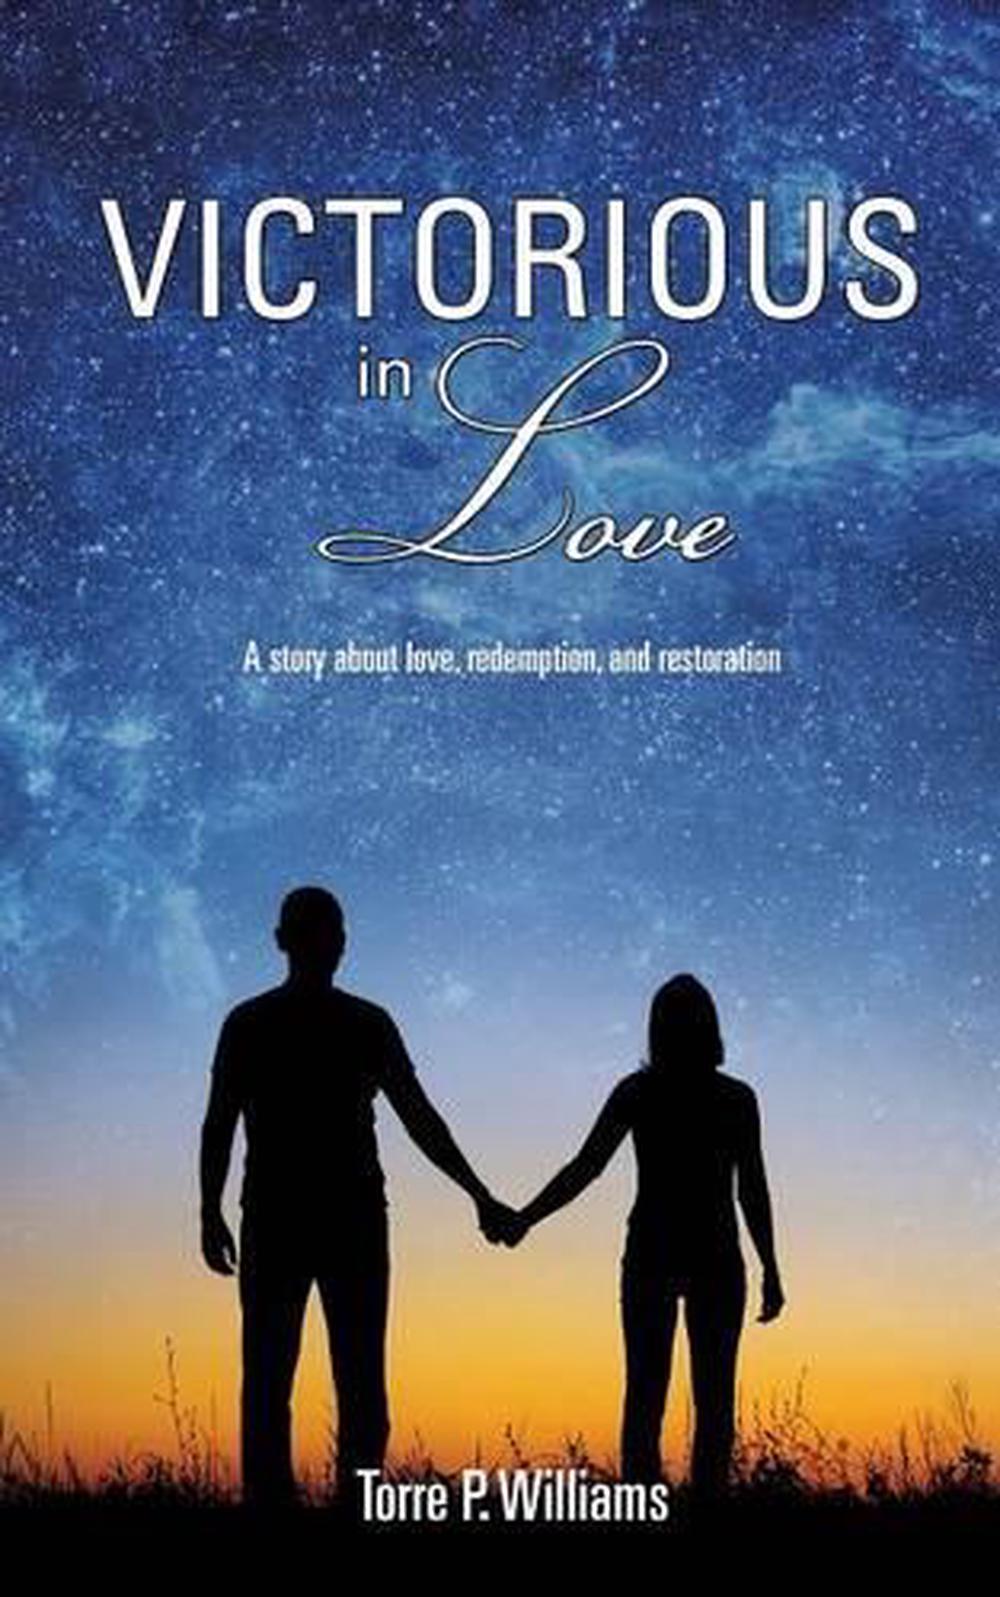 Victorious In Love by Torre P. Williams (English